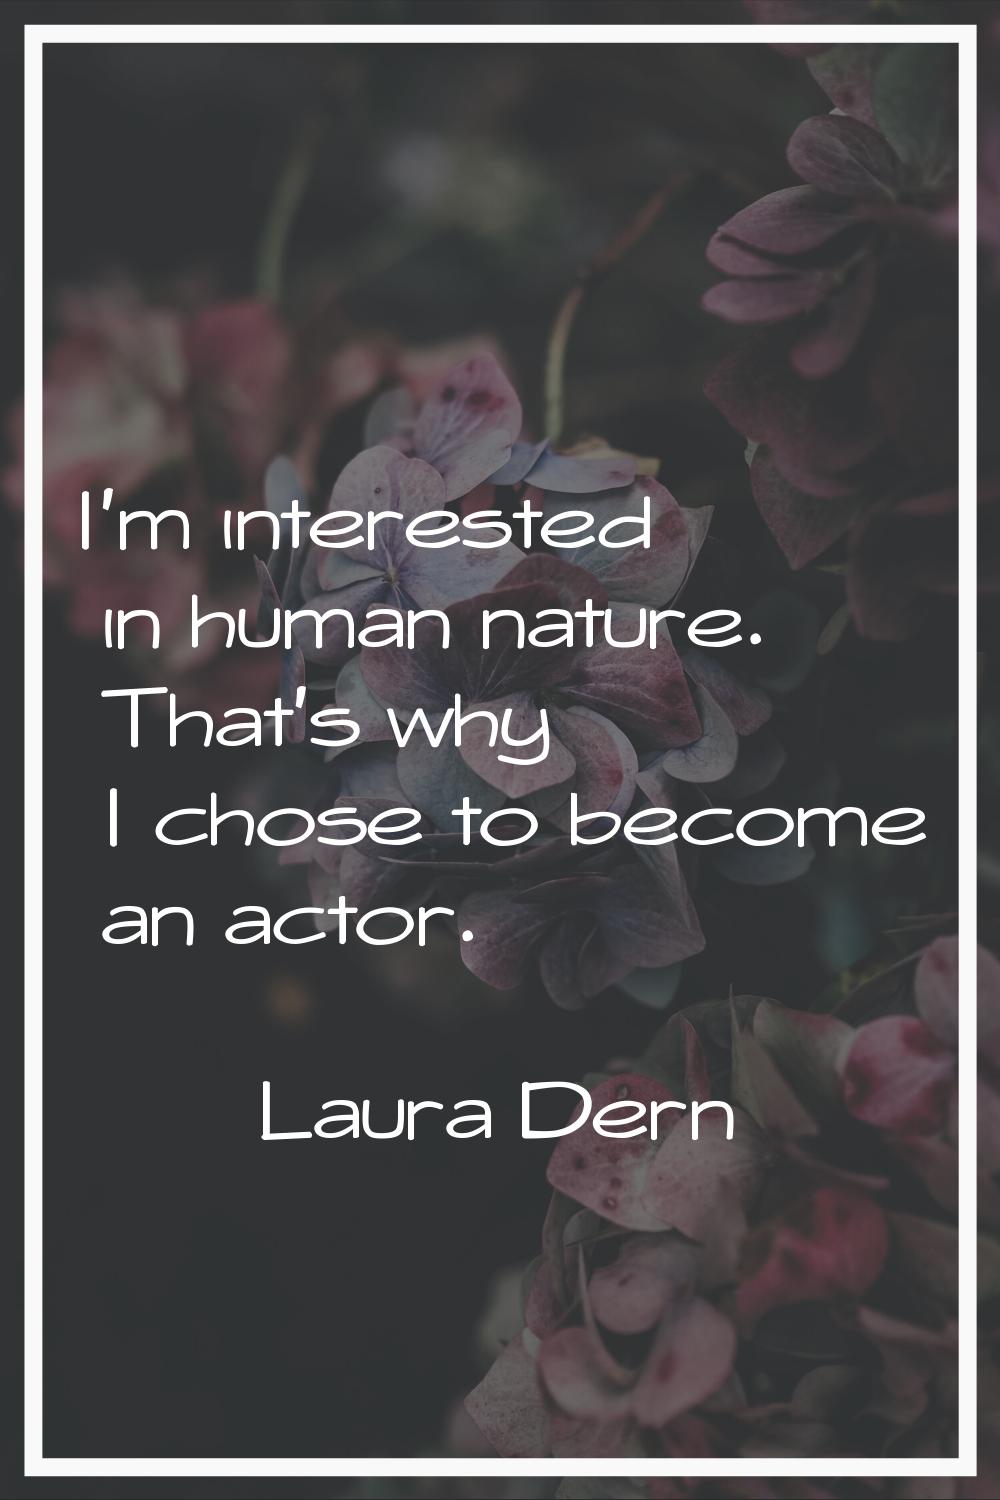 I'm interested in human nature. That's why I chose to become an actor.